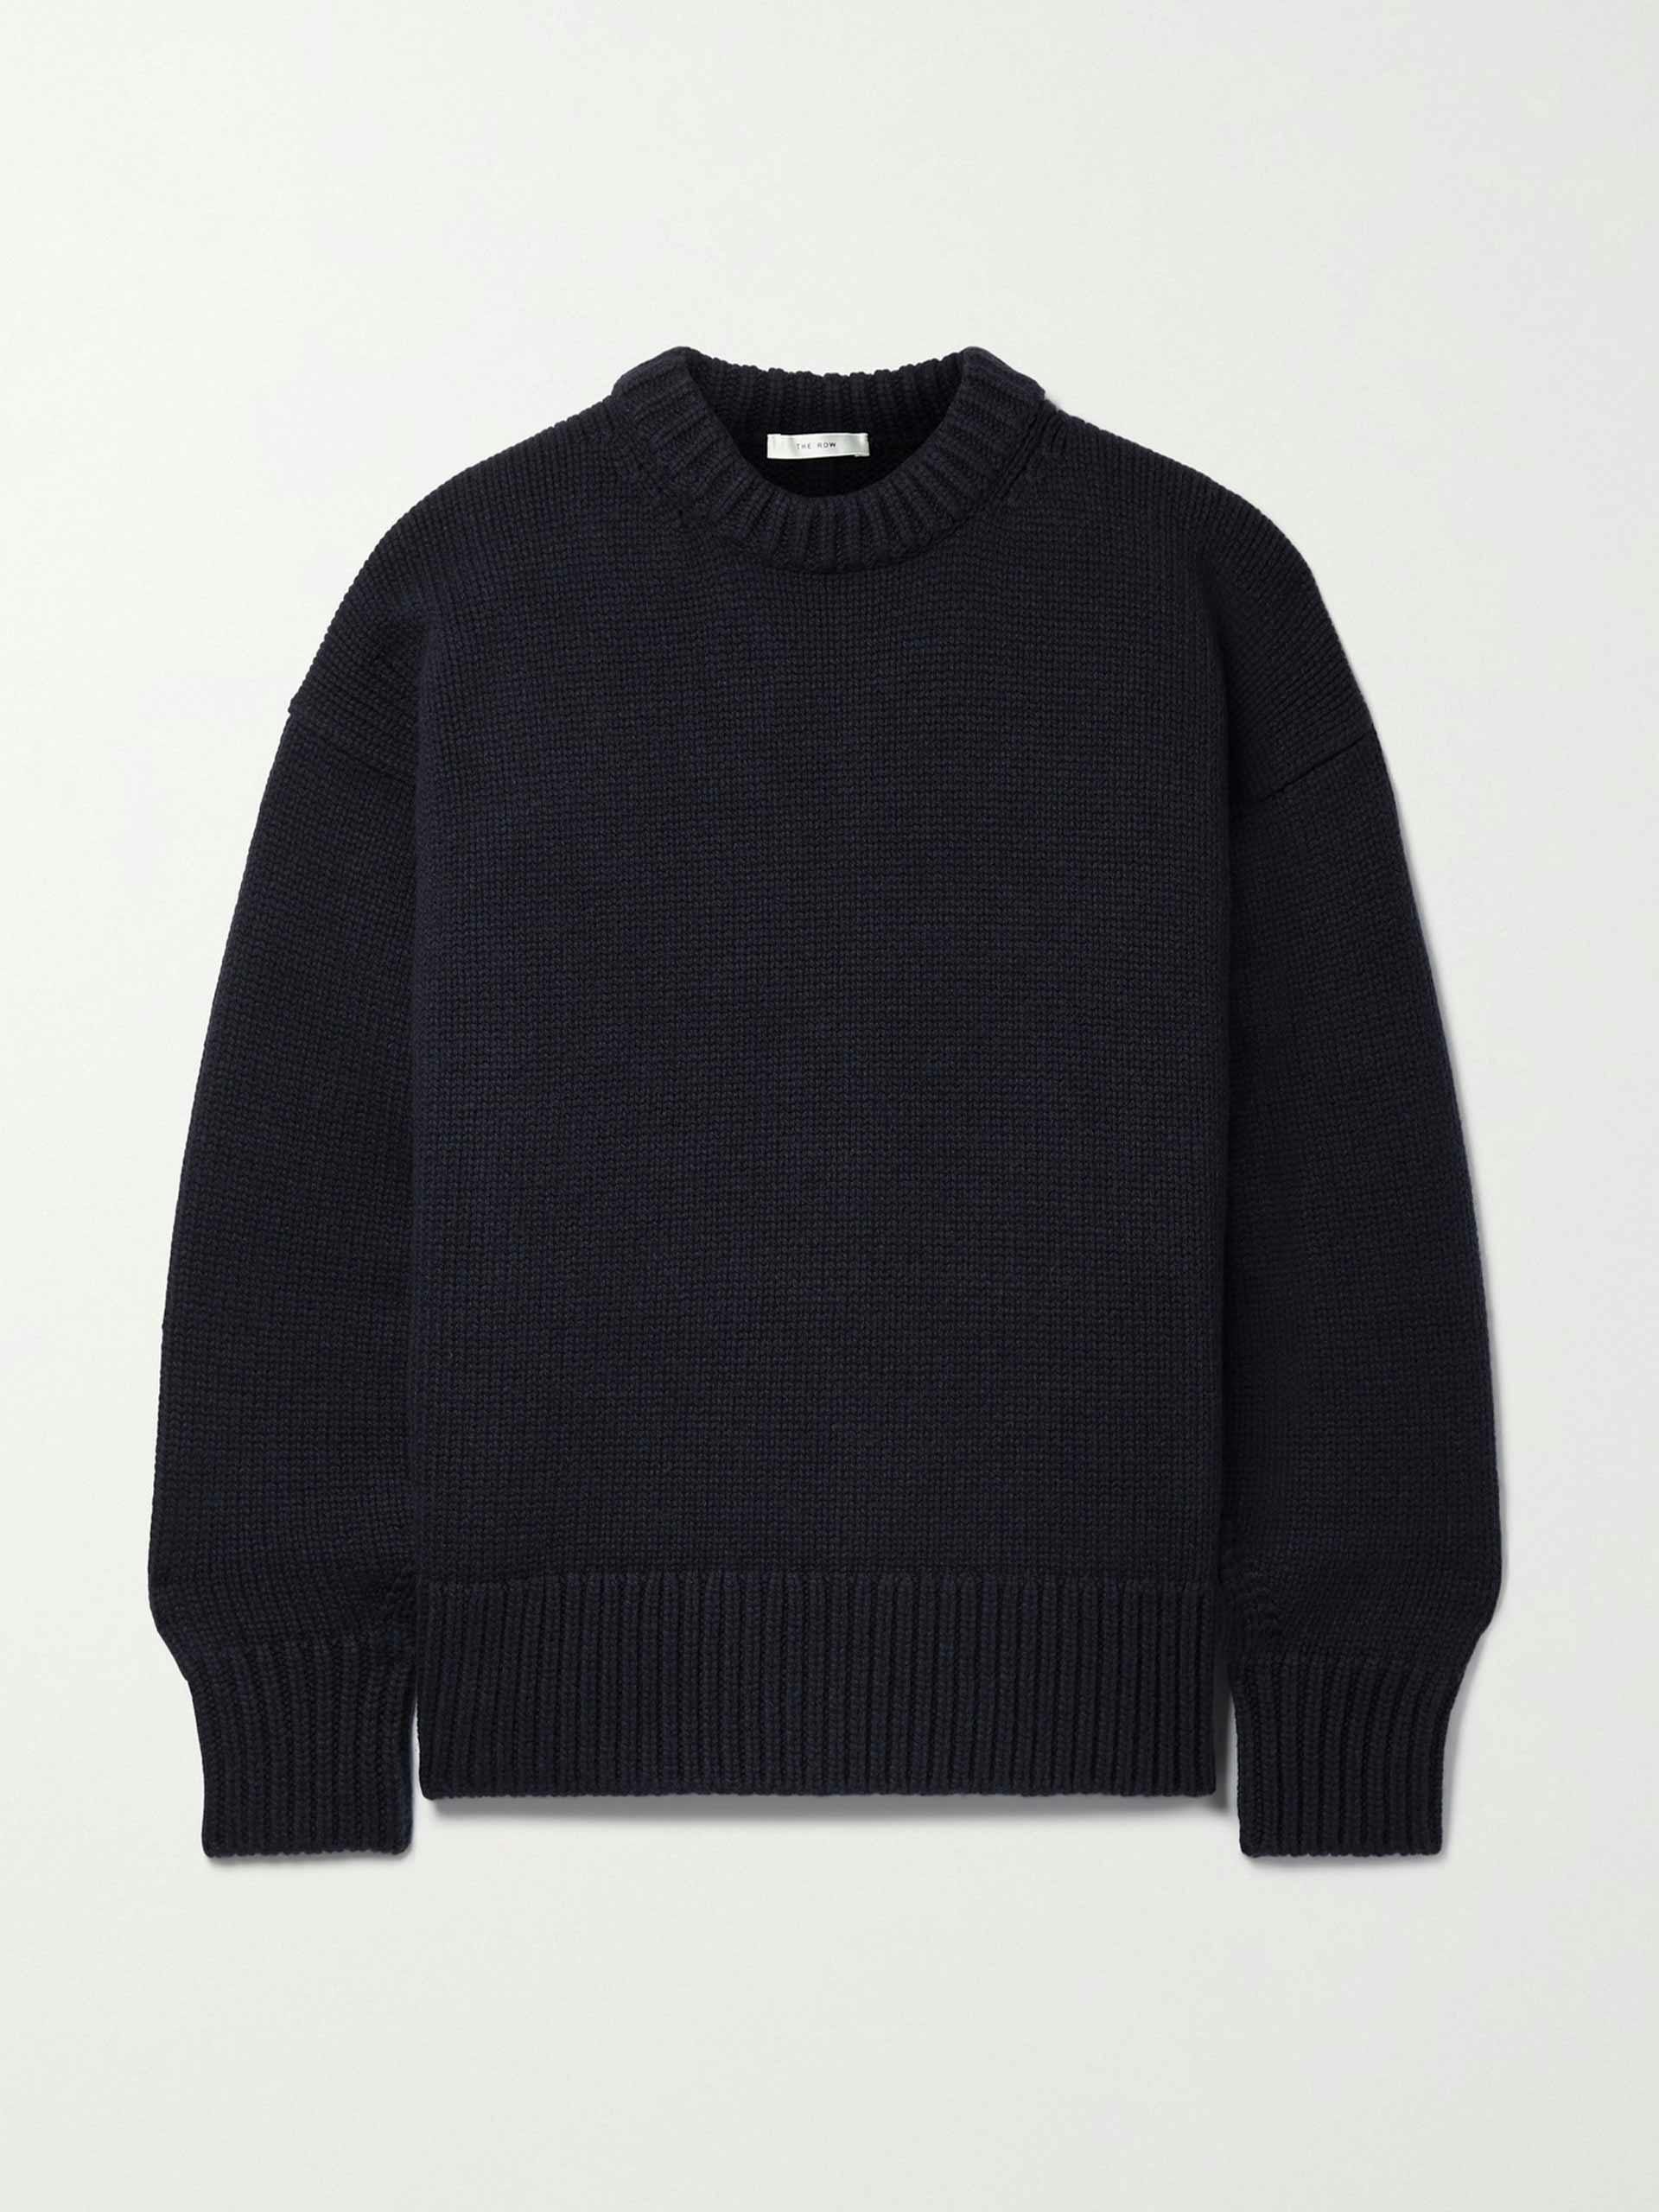 Ophelia wool and cashmere-blend sweater